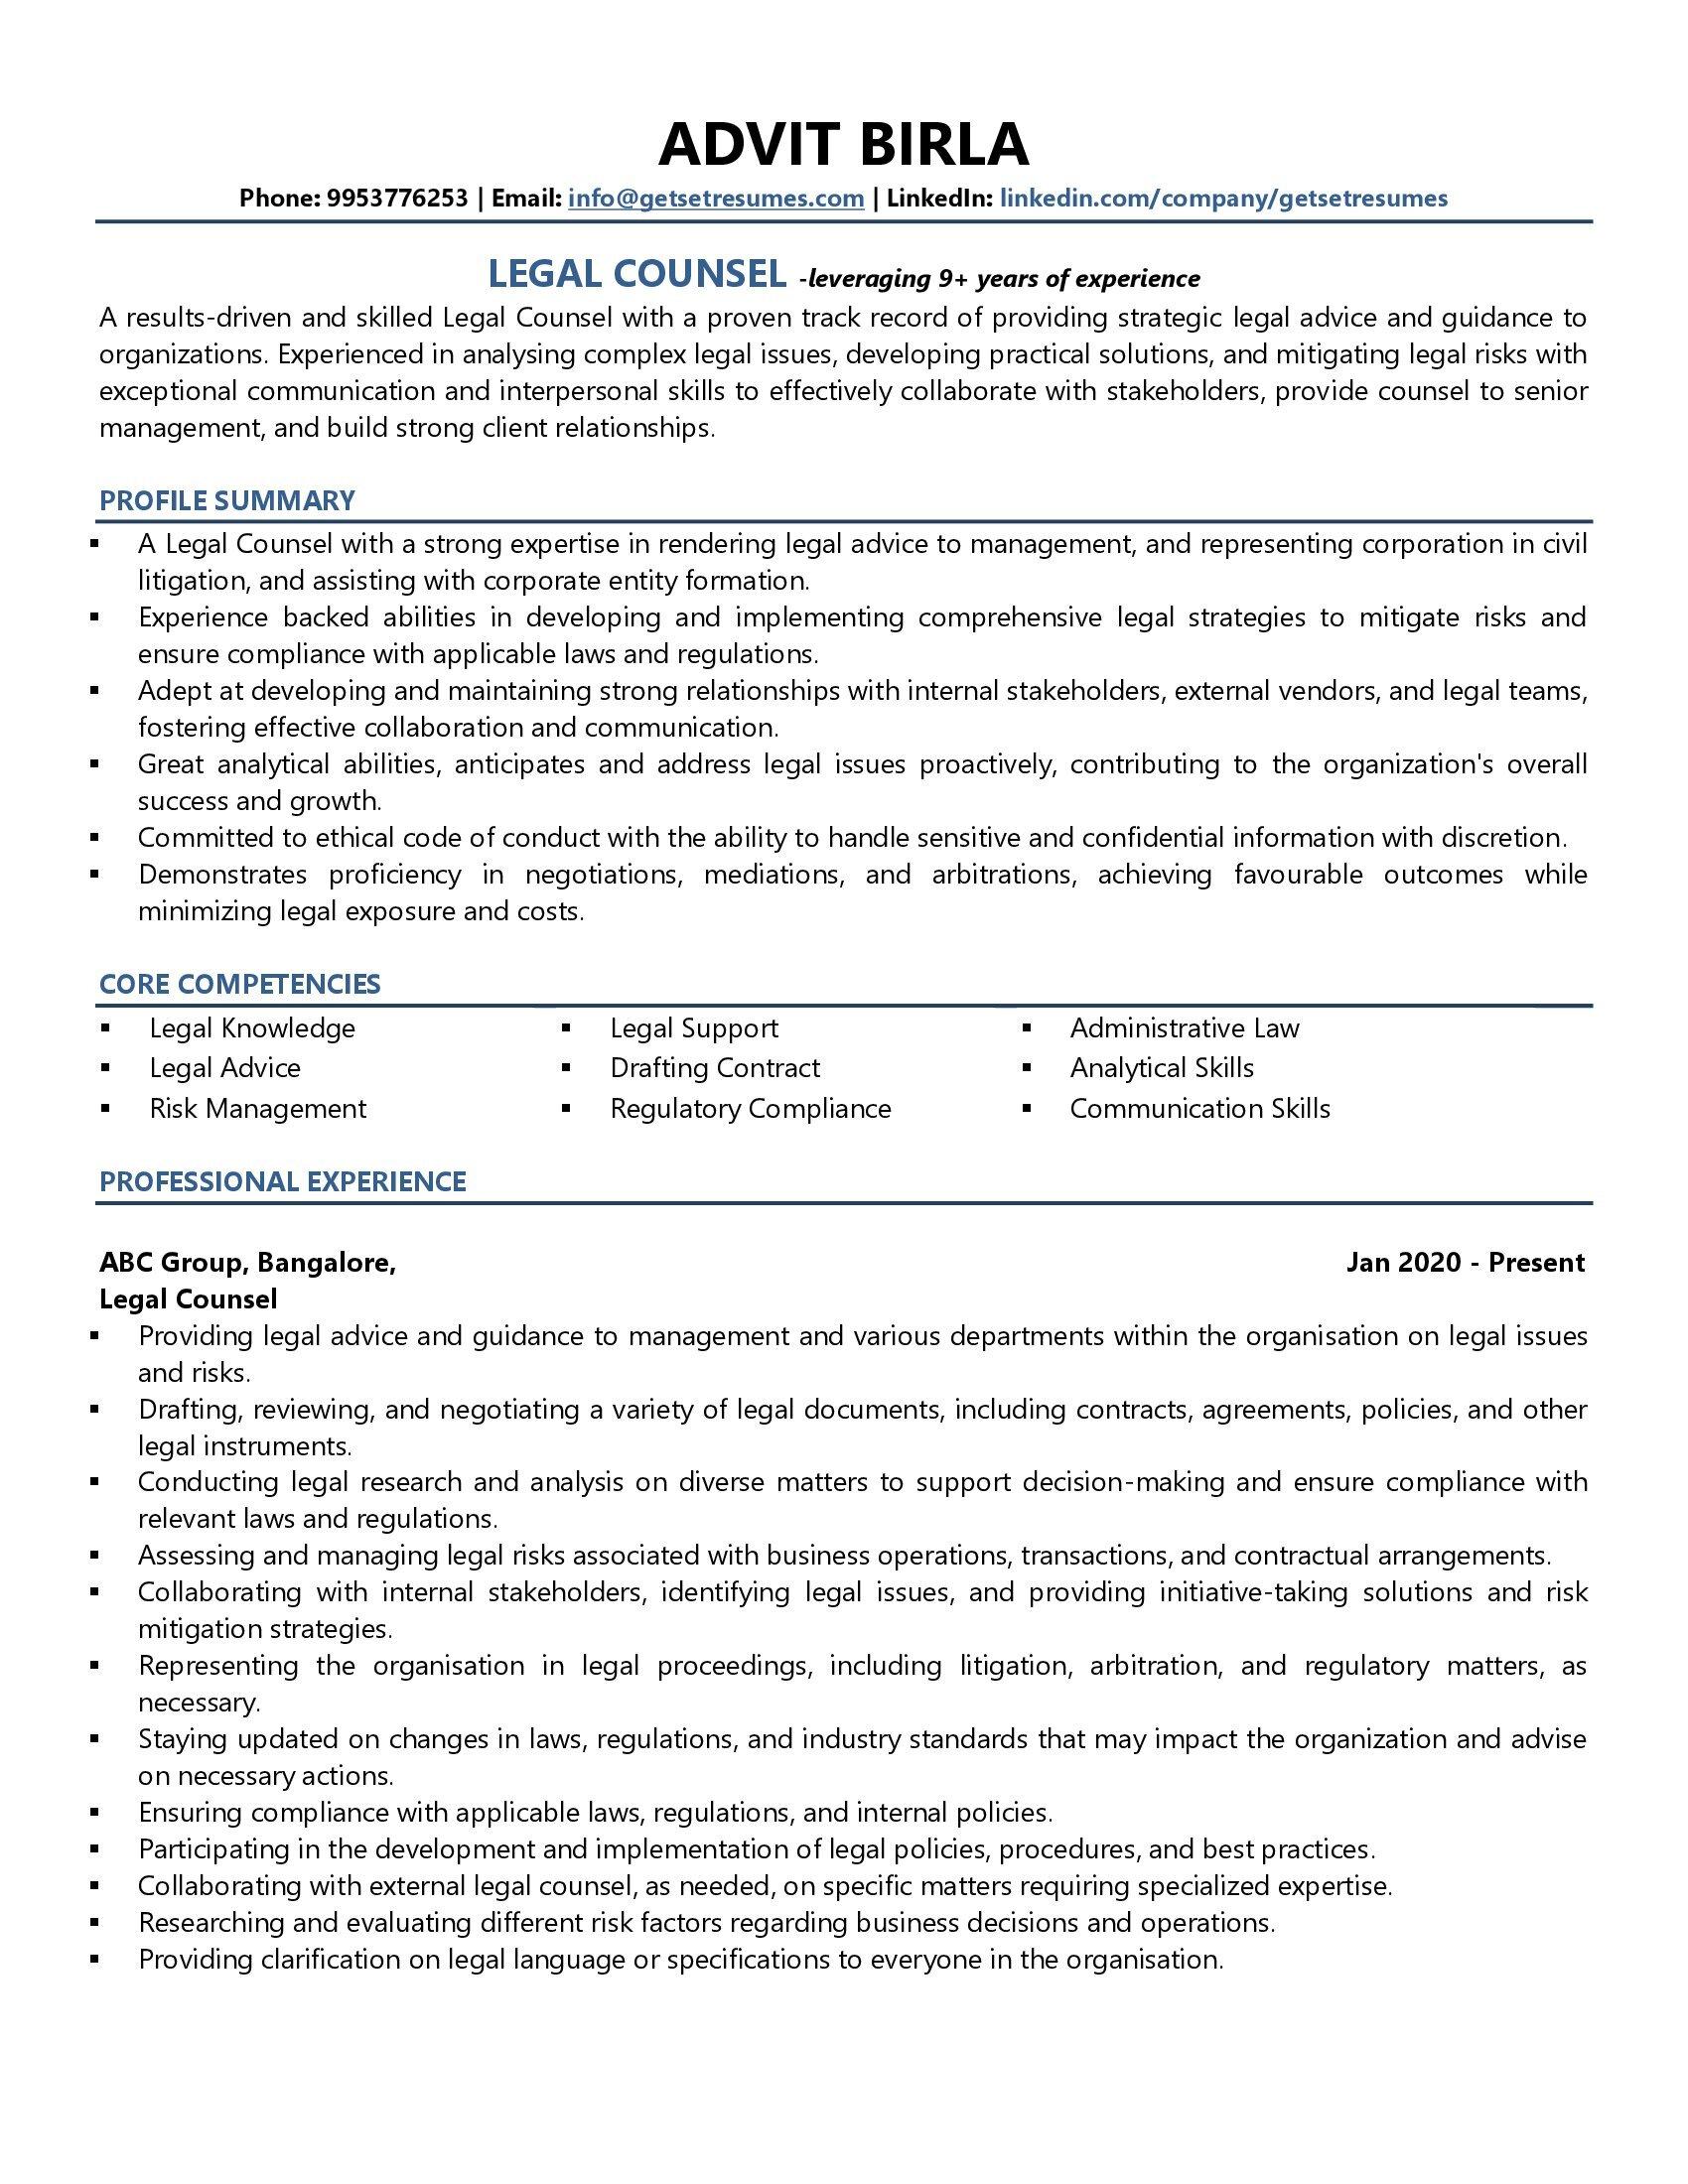 Legal Counsel - Resume Example & Template